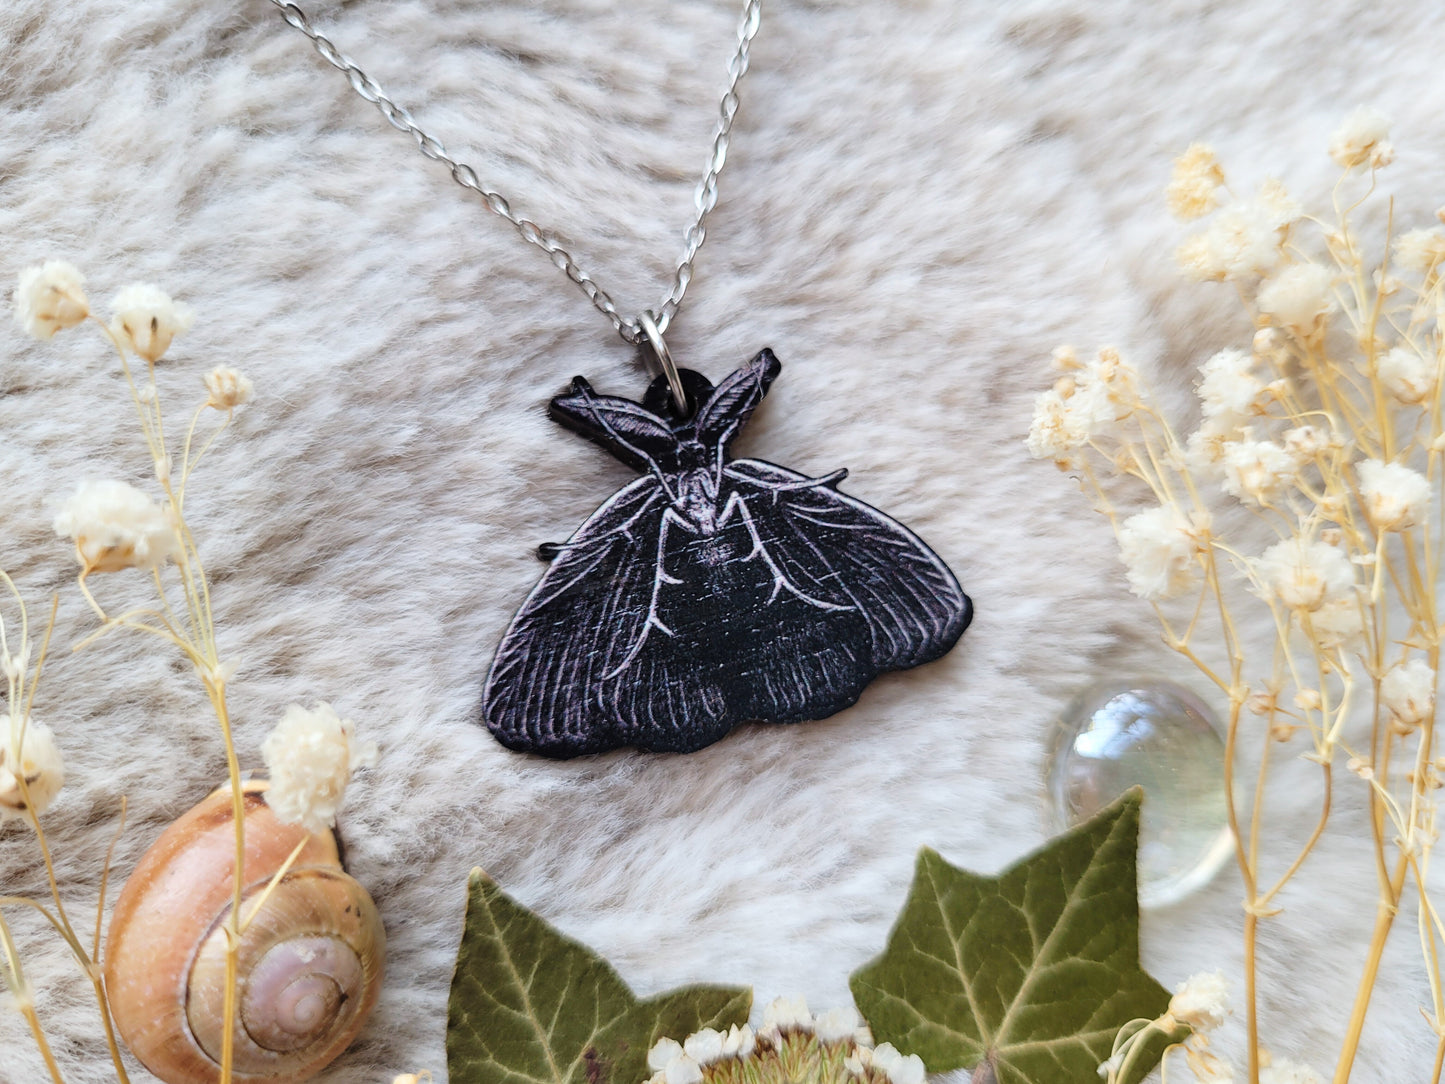 Dark Moth Illustrated necklace, responsibly sourced cherry wood, chain options available, by Grace Moth